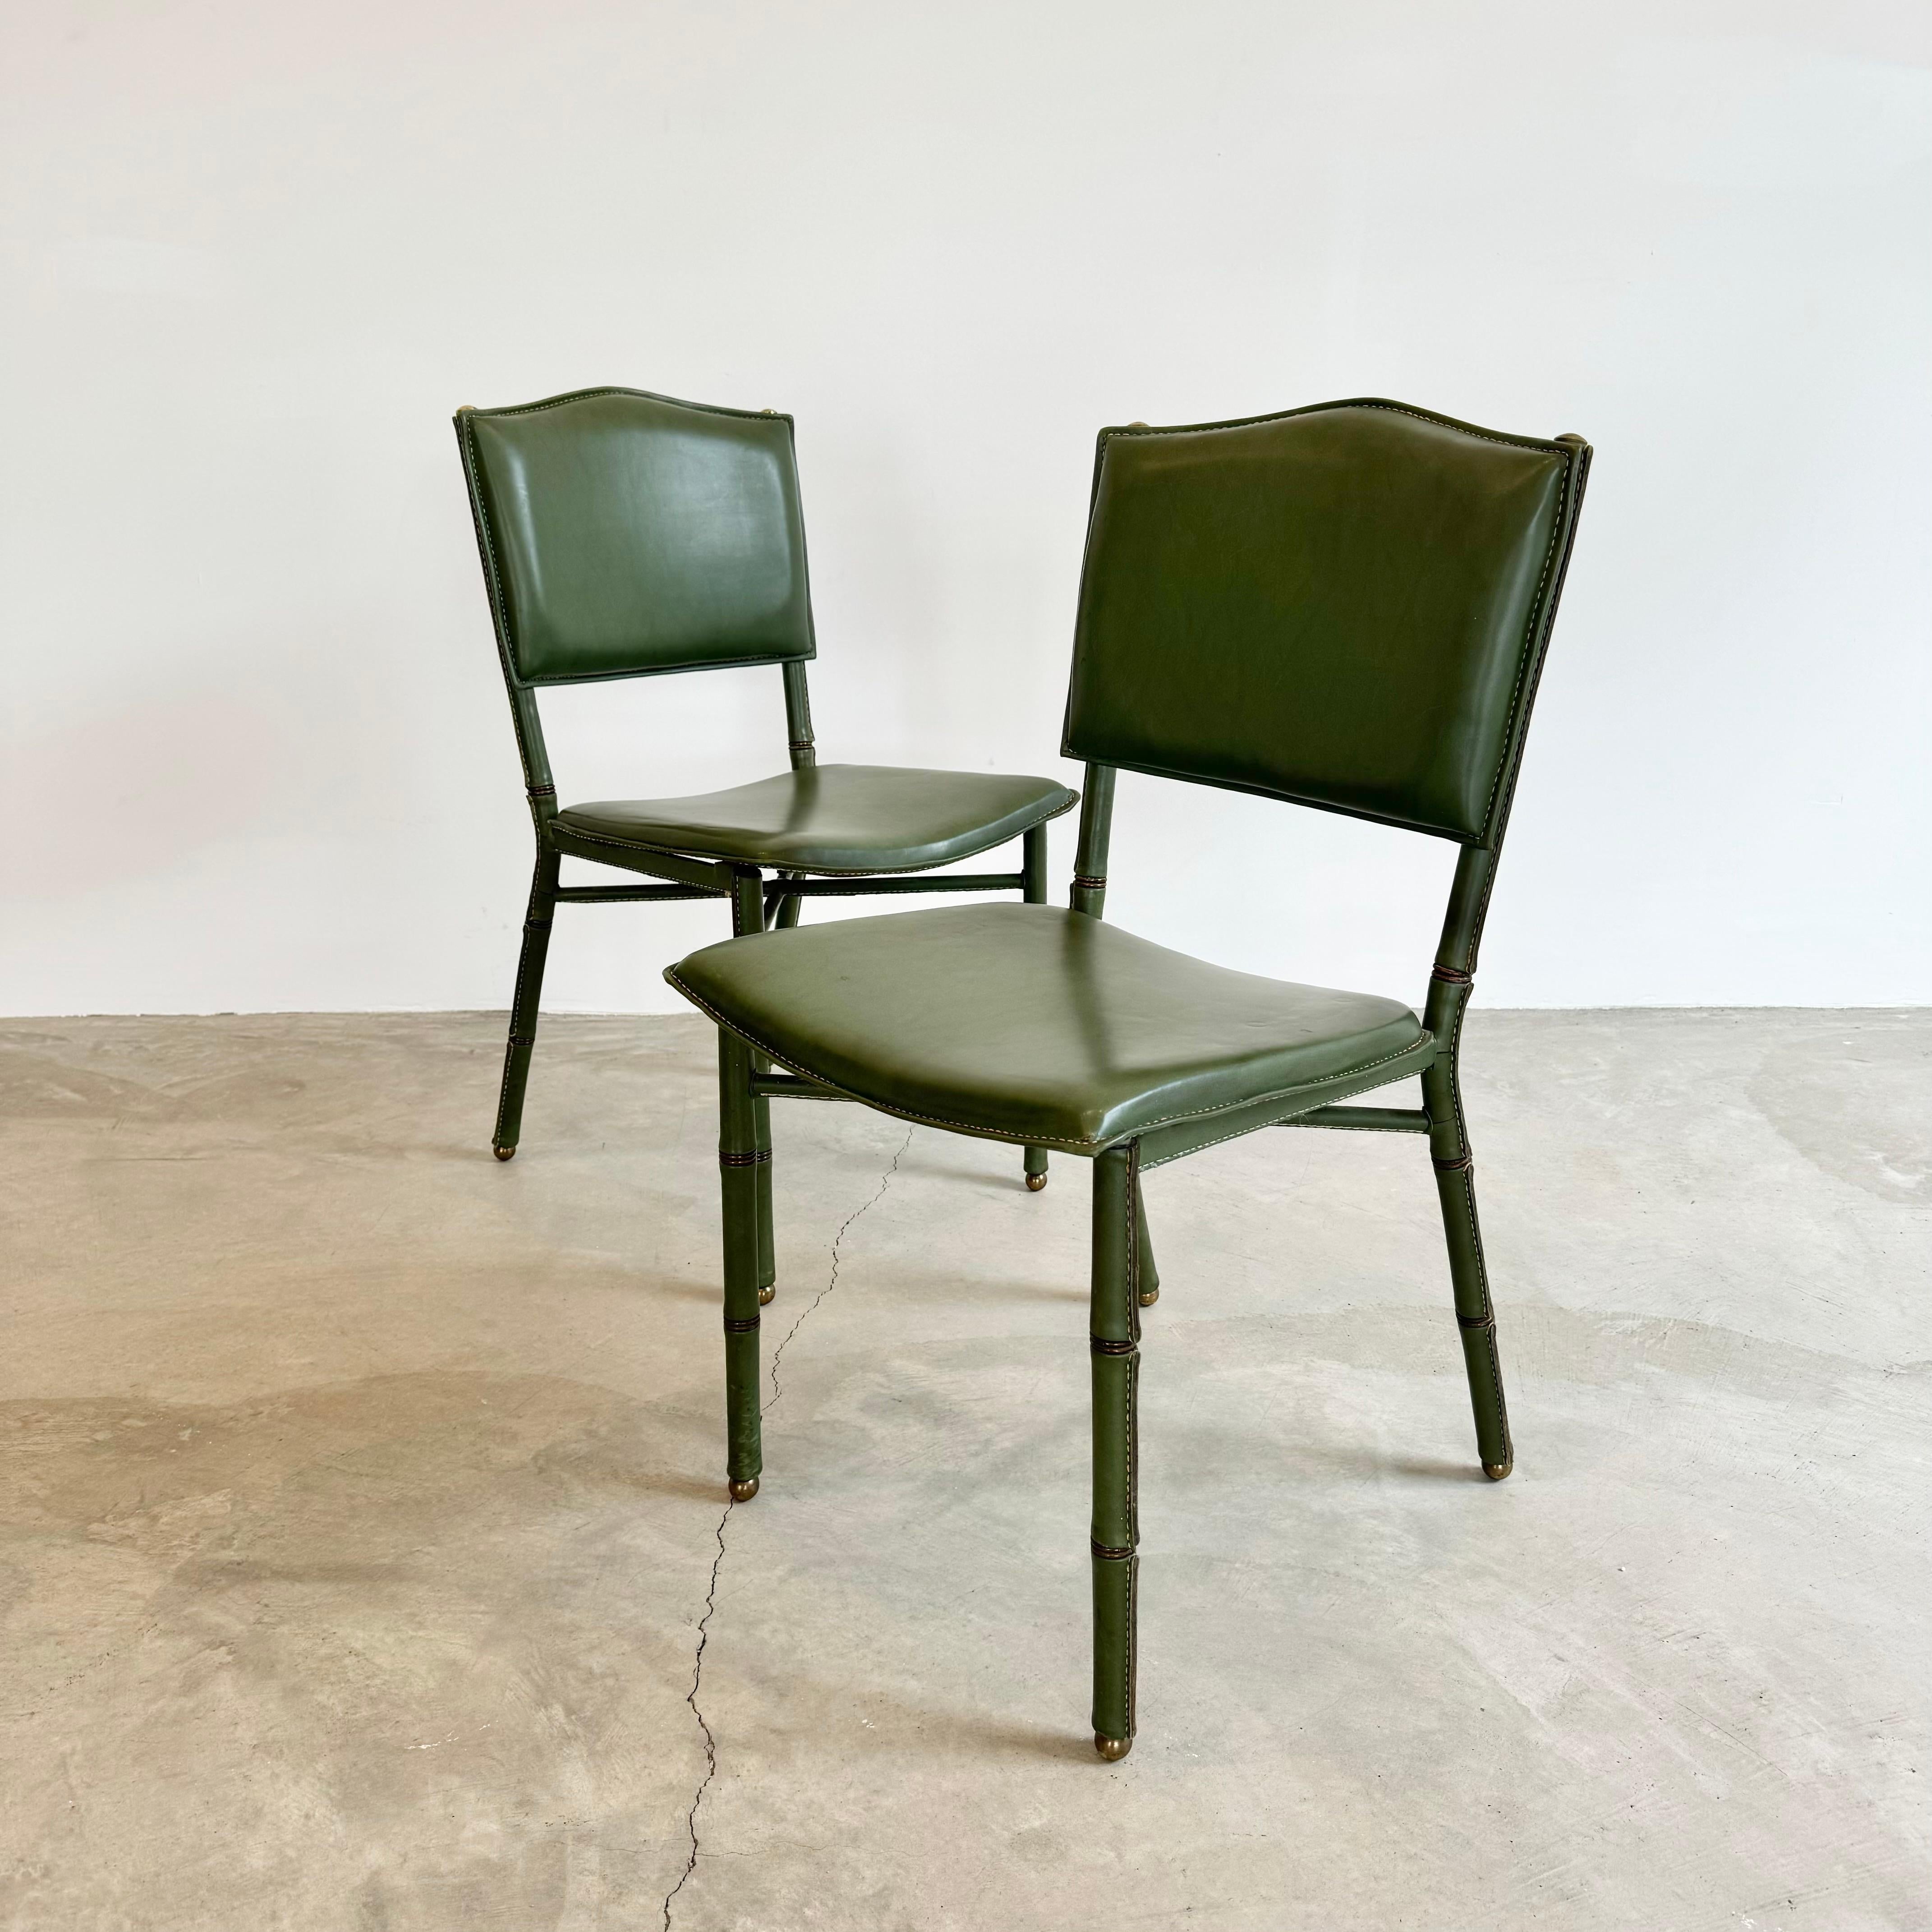 Art Deco Jacques Adnet Green Leather Chairs, Circa 1950s, France For Sale